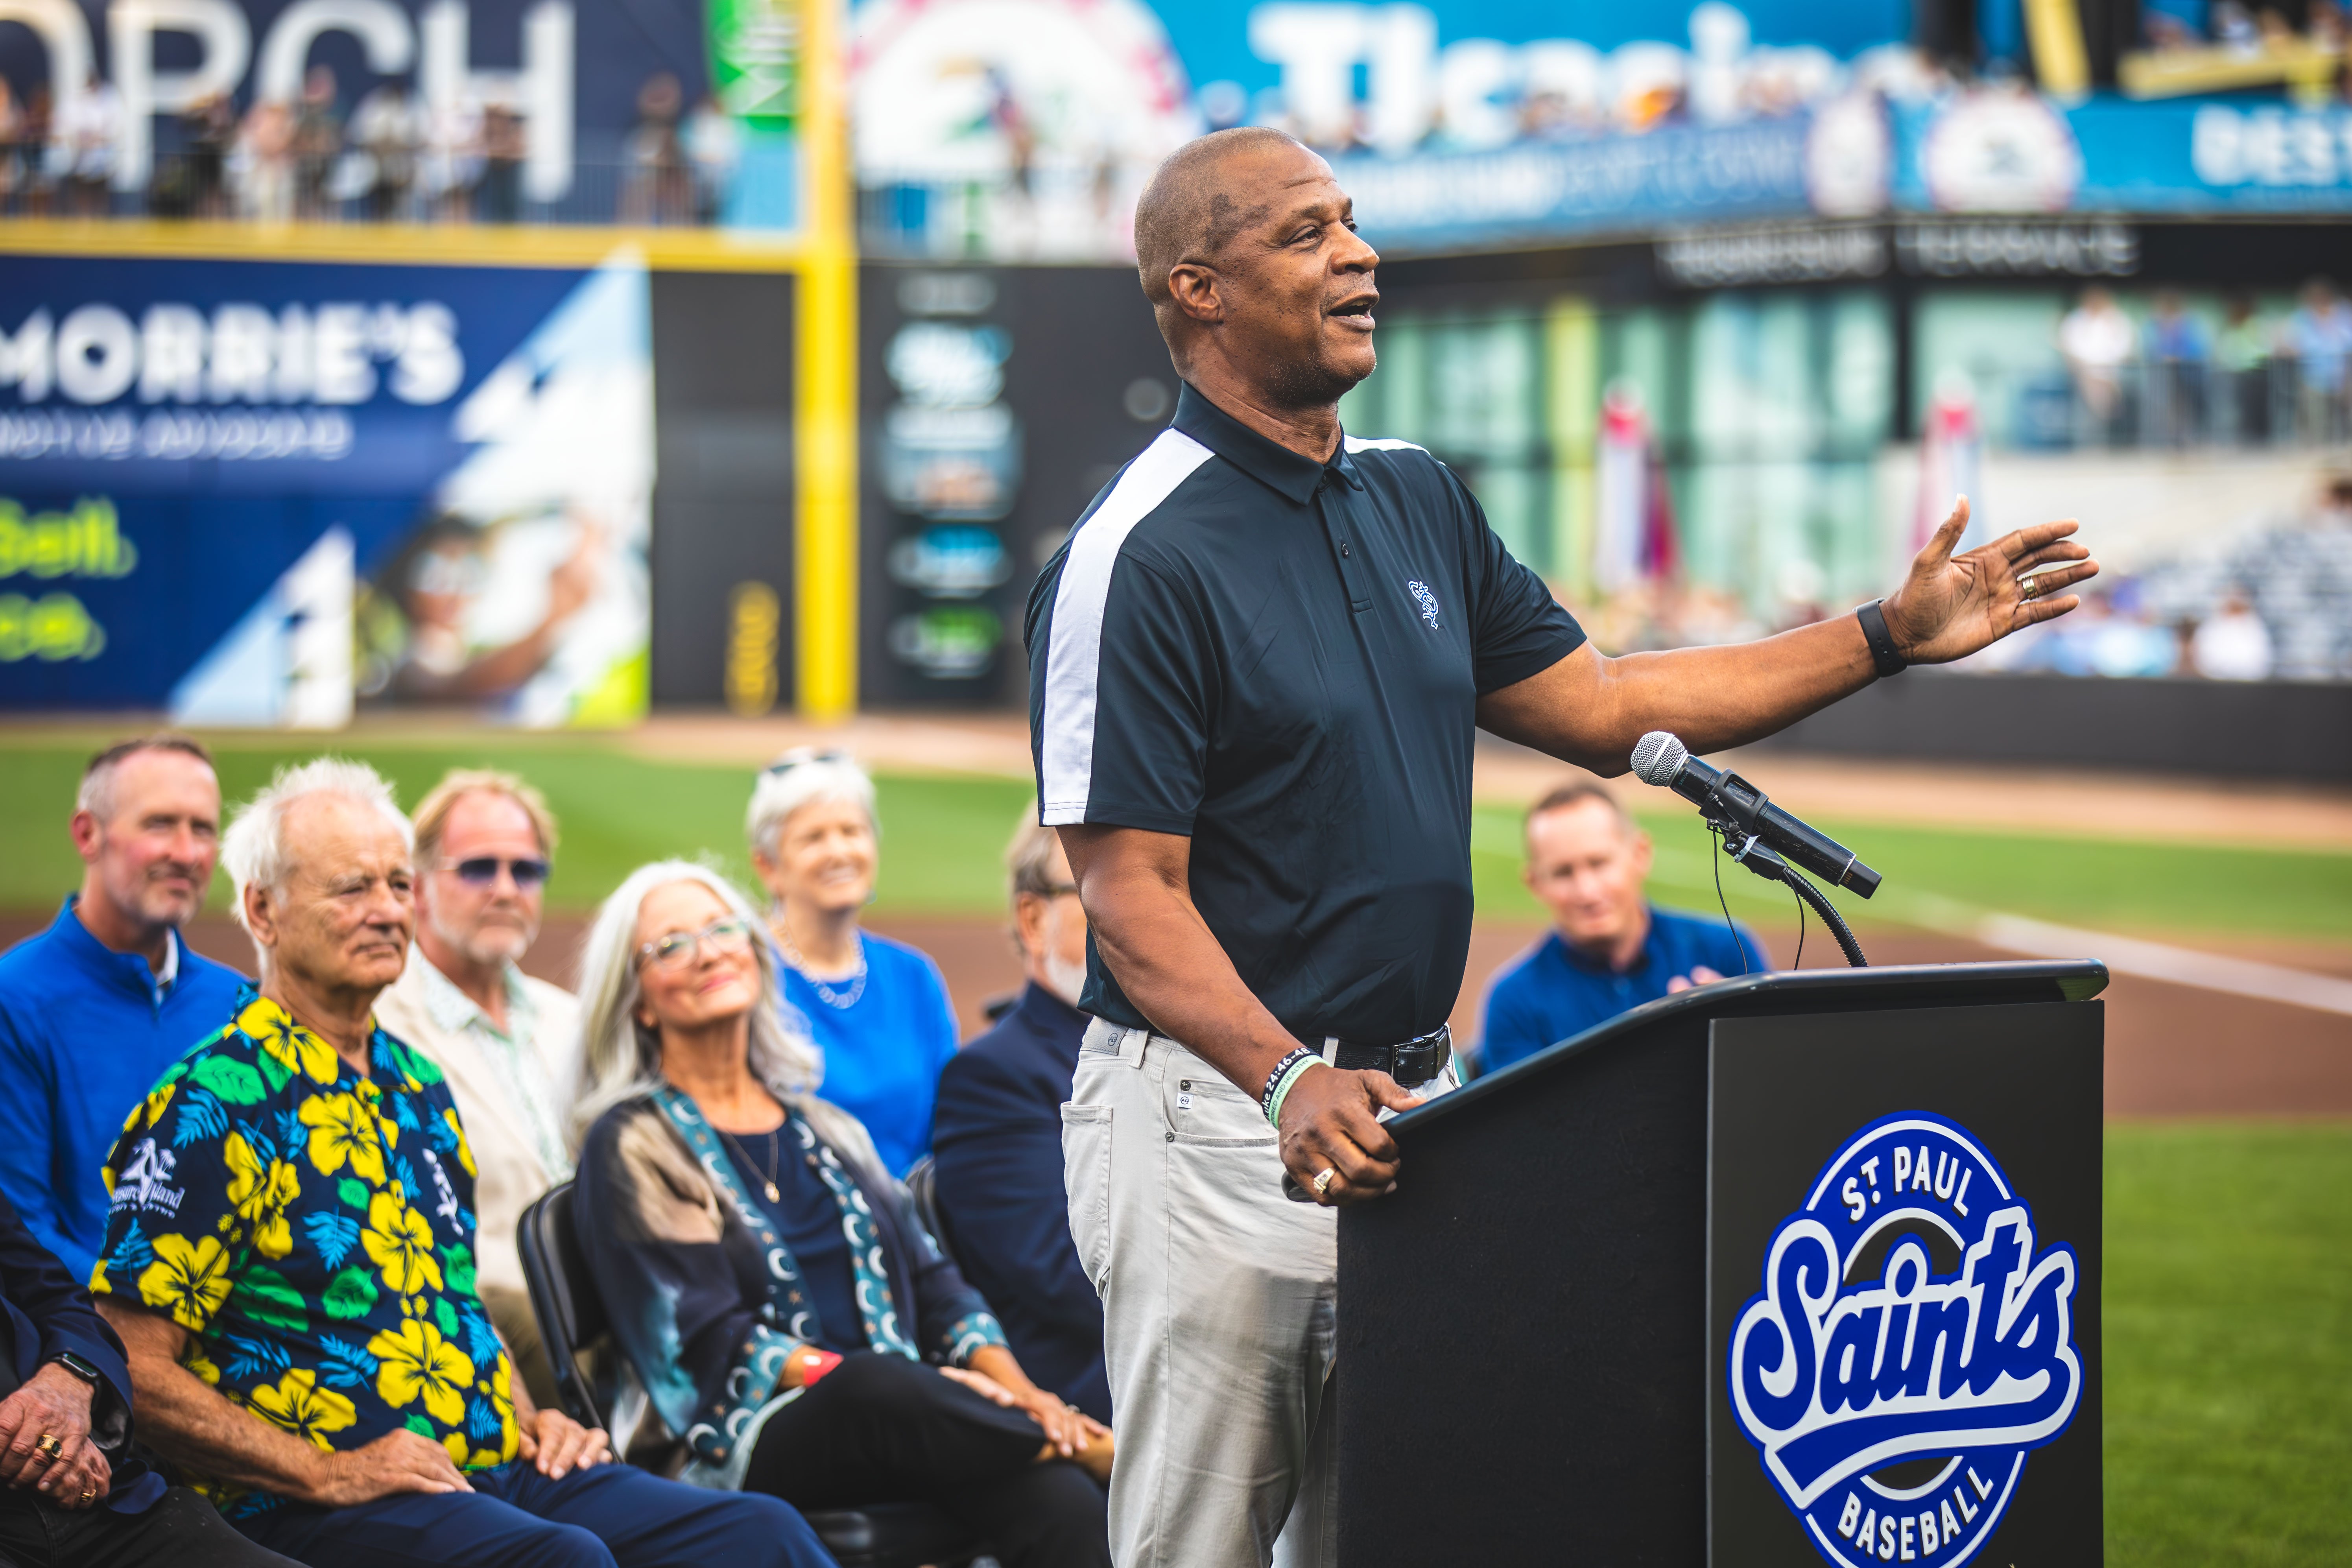 Former Saints player Darryl Strawberry, Bill Murray to be honored at CHS  Field Aug. 12 - CBS Minnesota